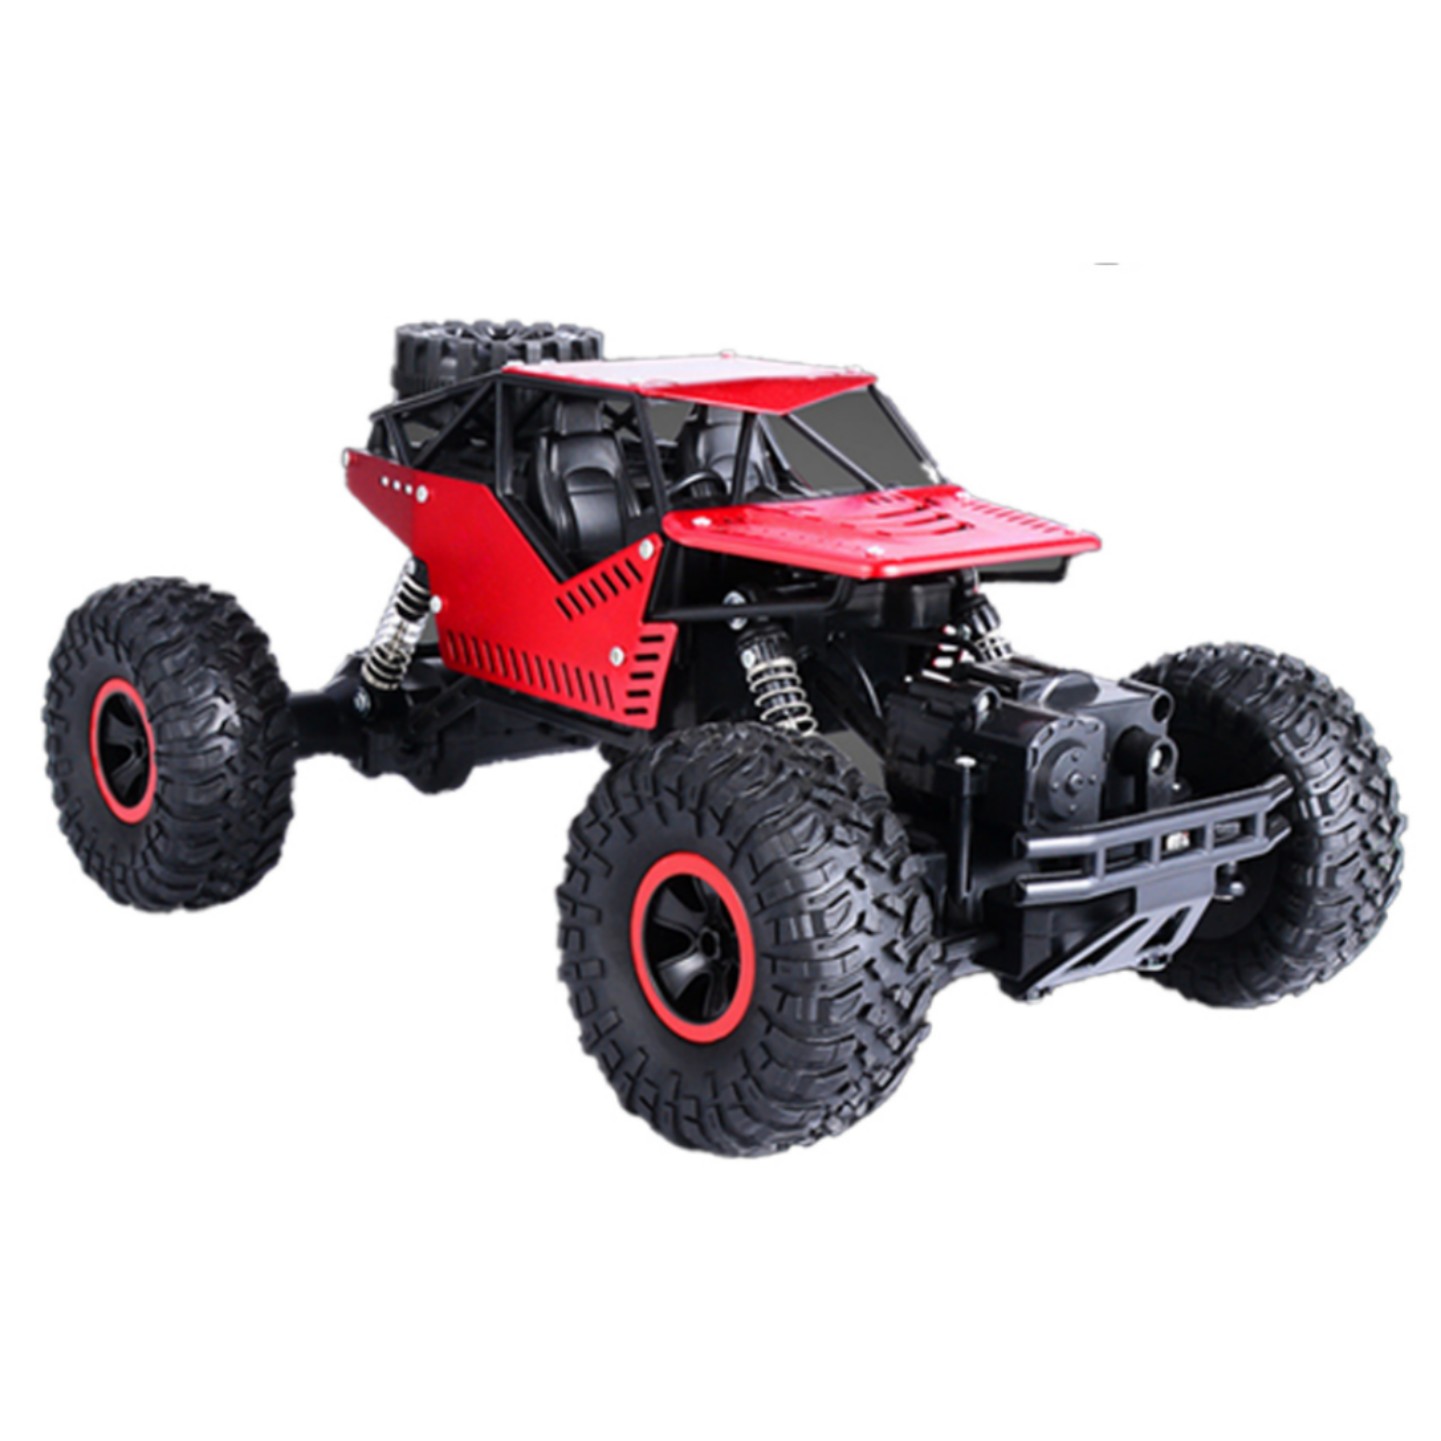 1:16 Alloy Remote Control Car Toy Model 4wd Rechargeable High Speed Off-Road Vehicle RC Climbing Car Toys